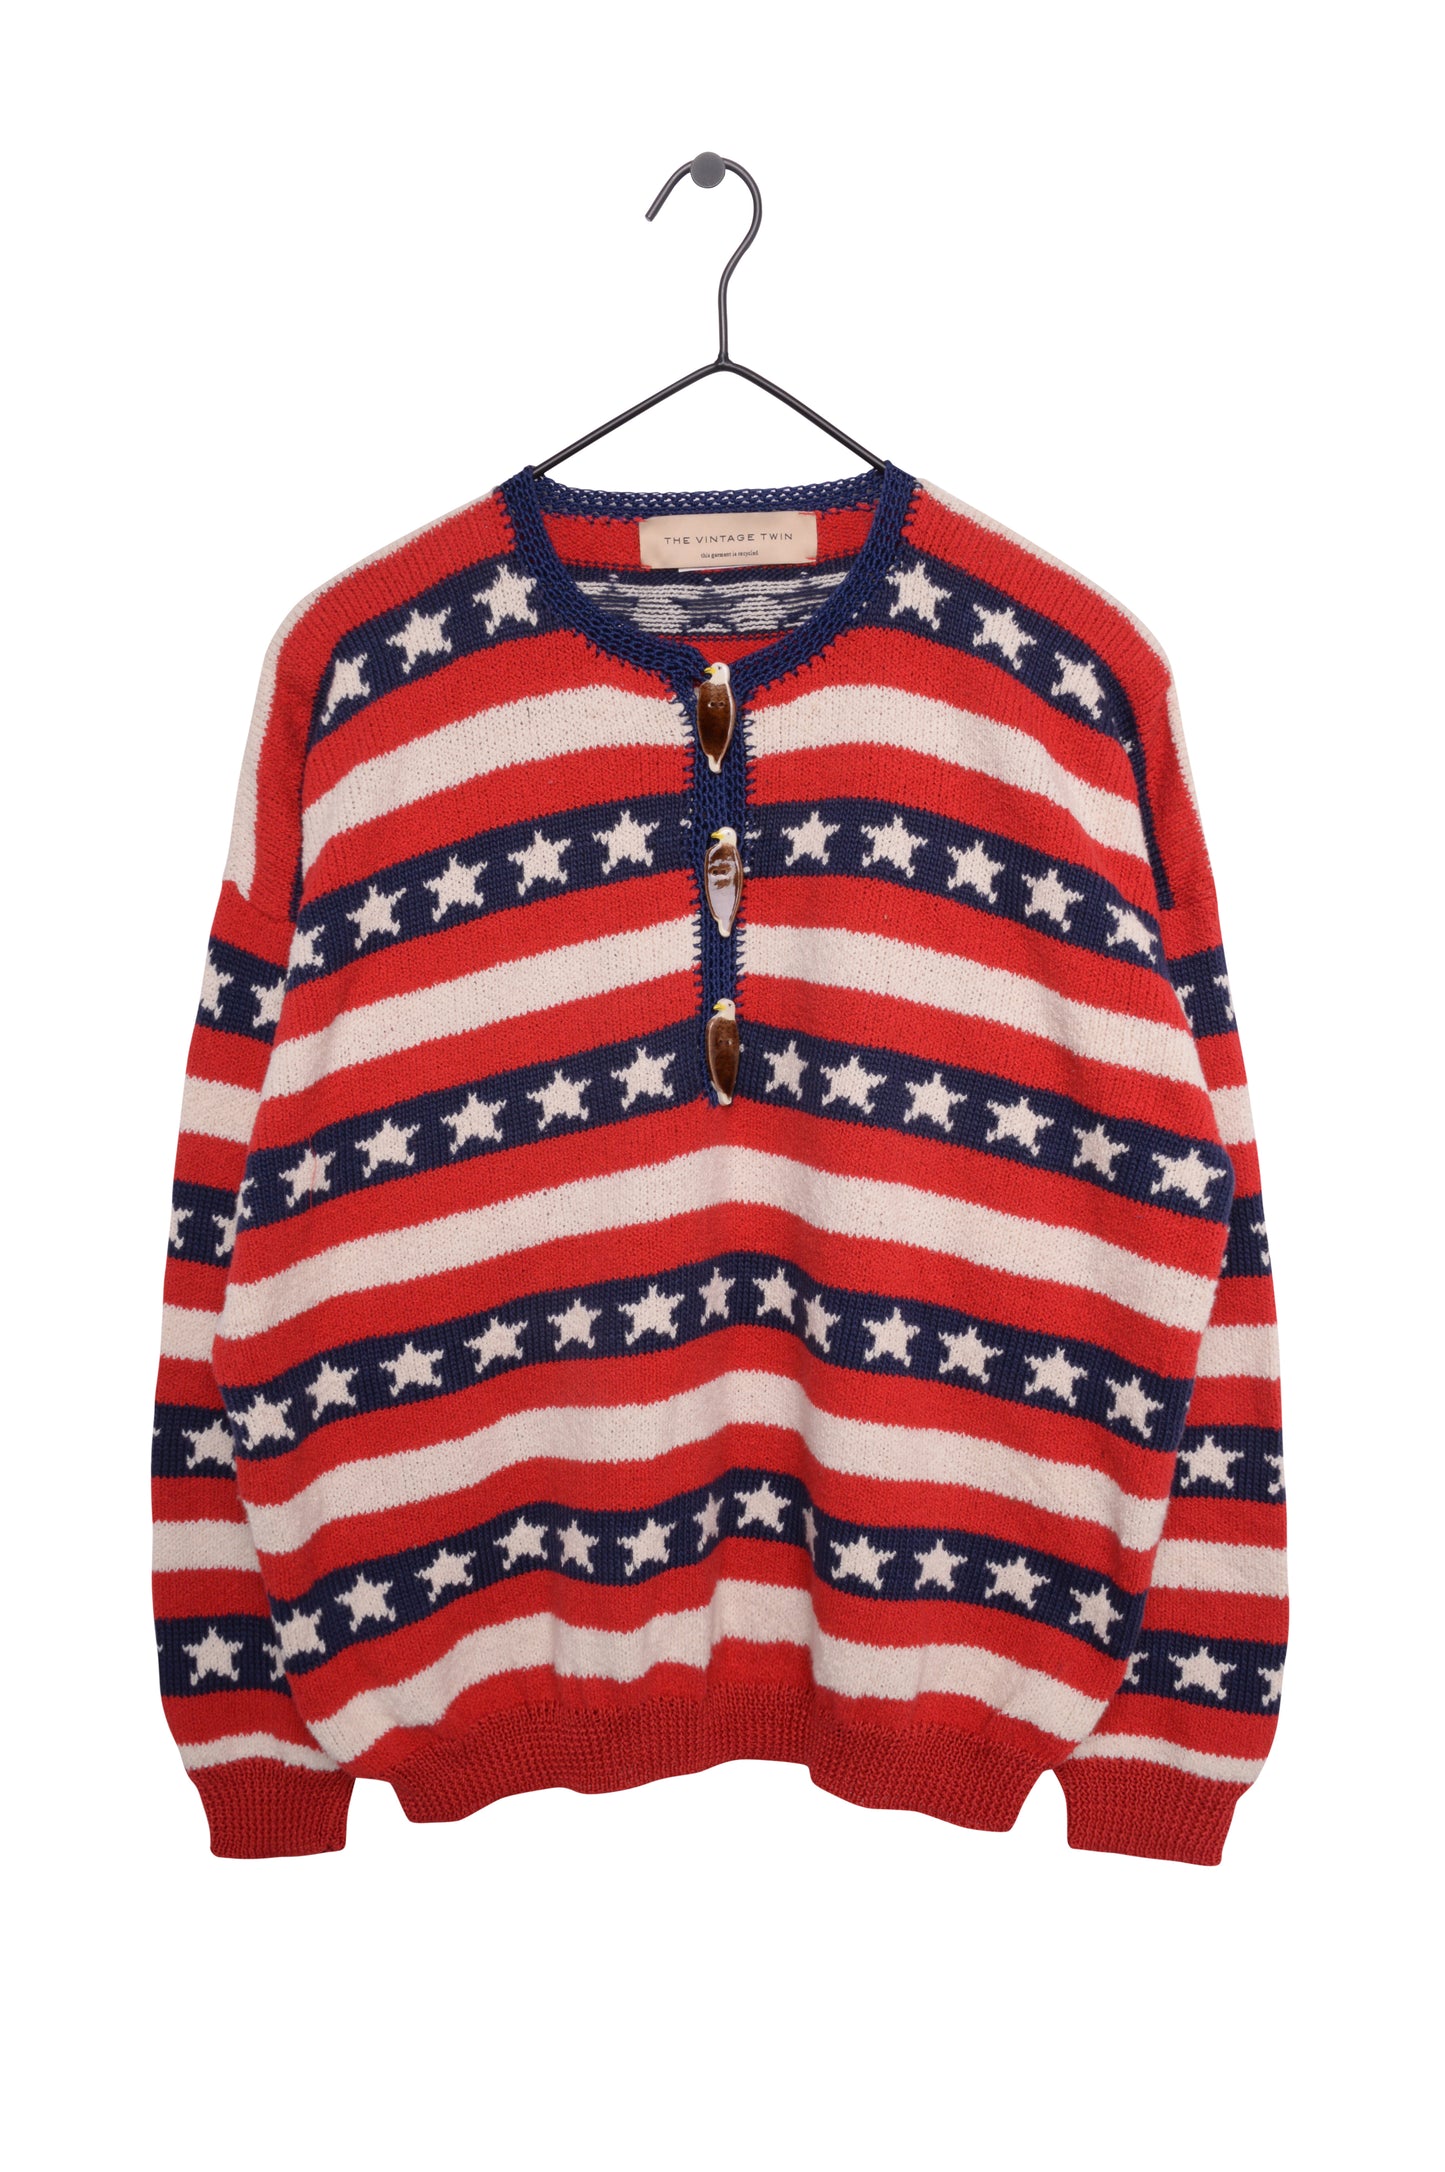 Stars and Stripes Sweater